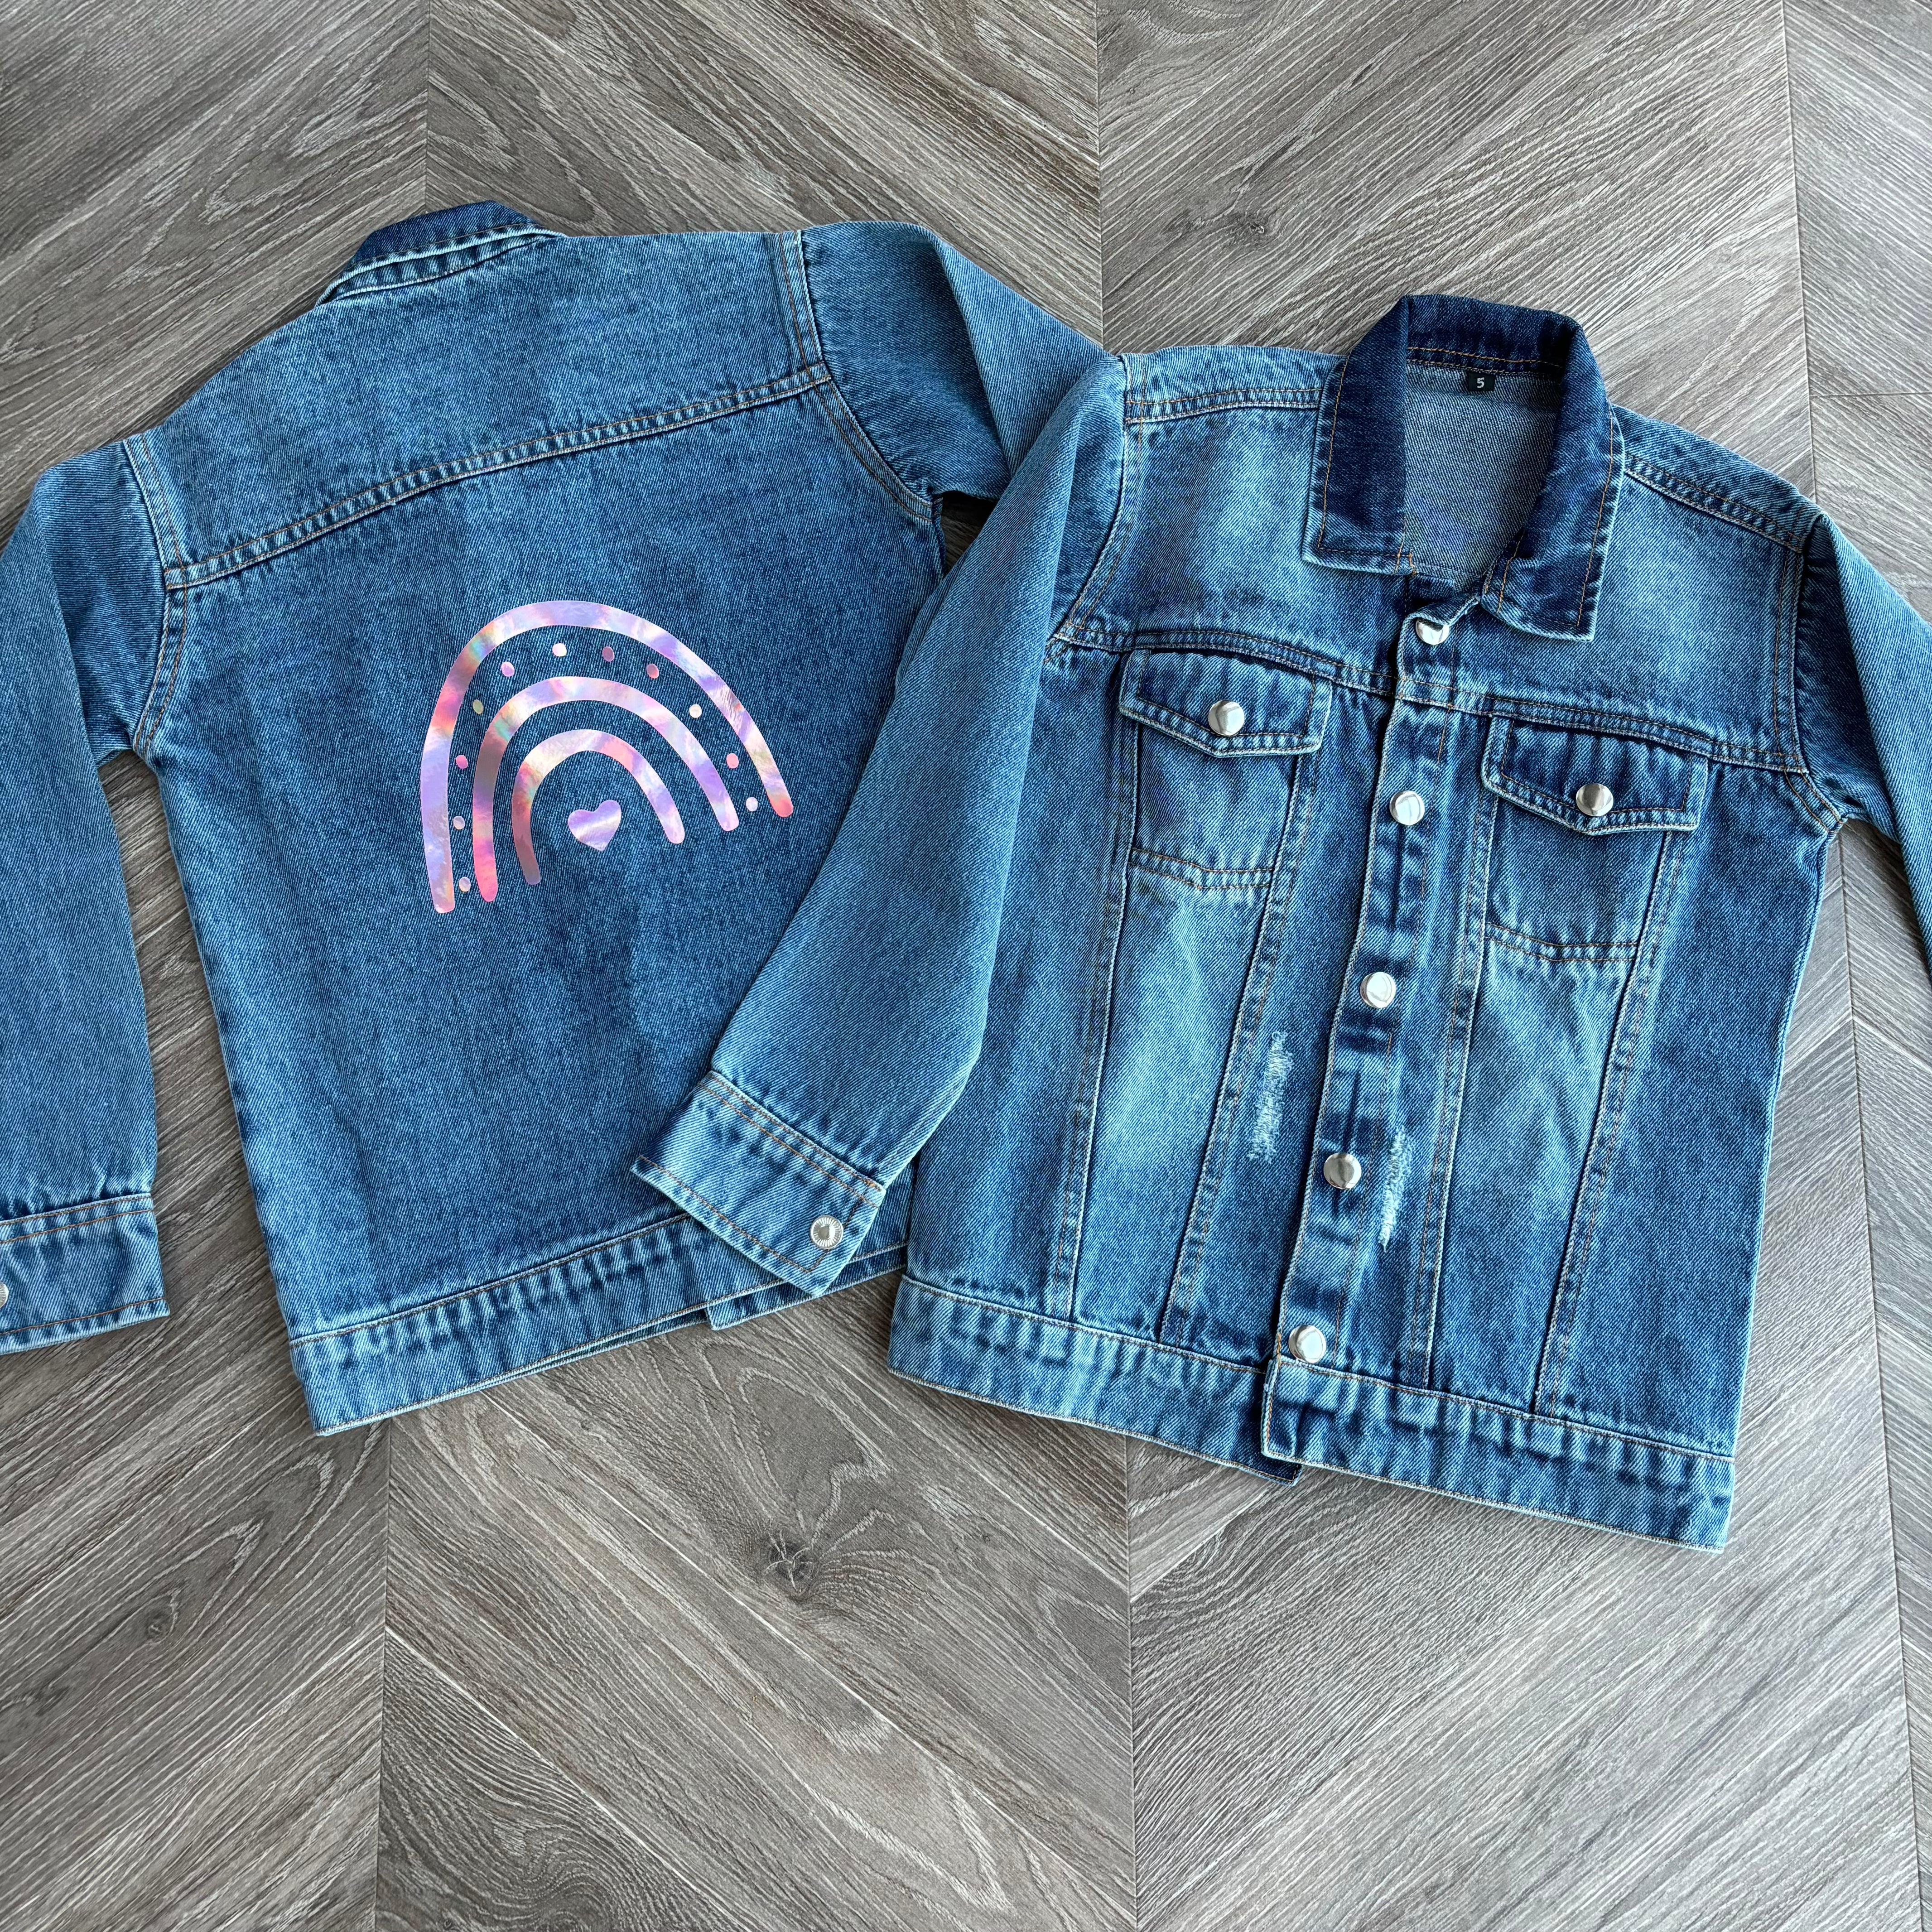 Personalised/Themed Denim Jackets with print